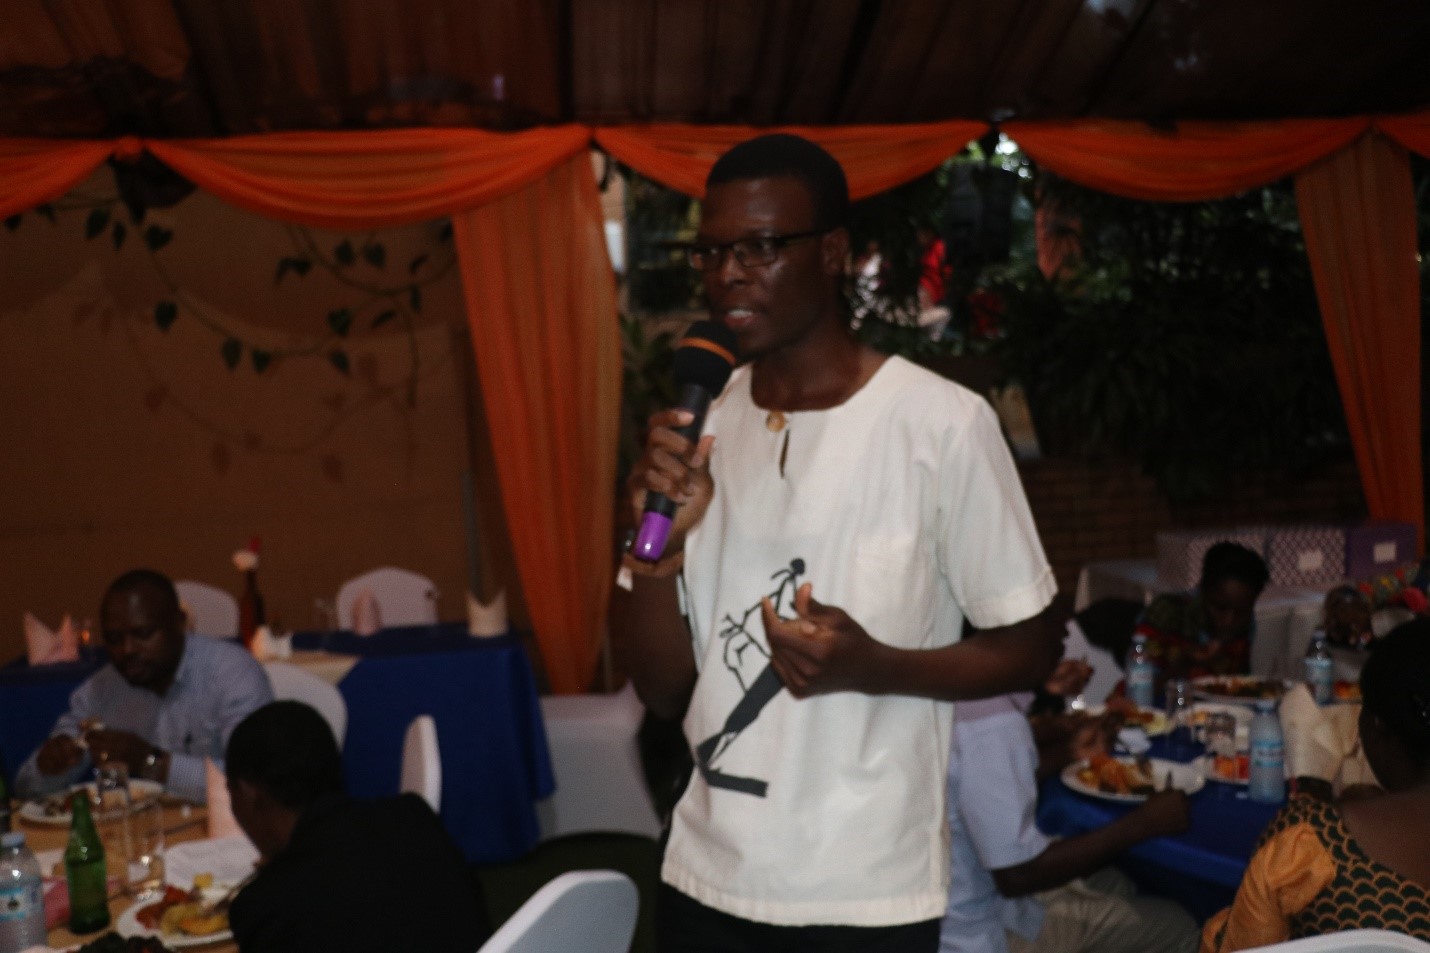 Rawlance Ndejjo, the PhD Forum President welcoming guests at the dinner. The Forum offers support to students pursuing PhDs at MakSPH students and to staff who might be pursuing PhDs either at MakSPH or at other universities in the world.